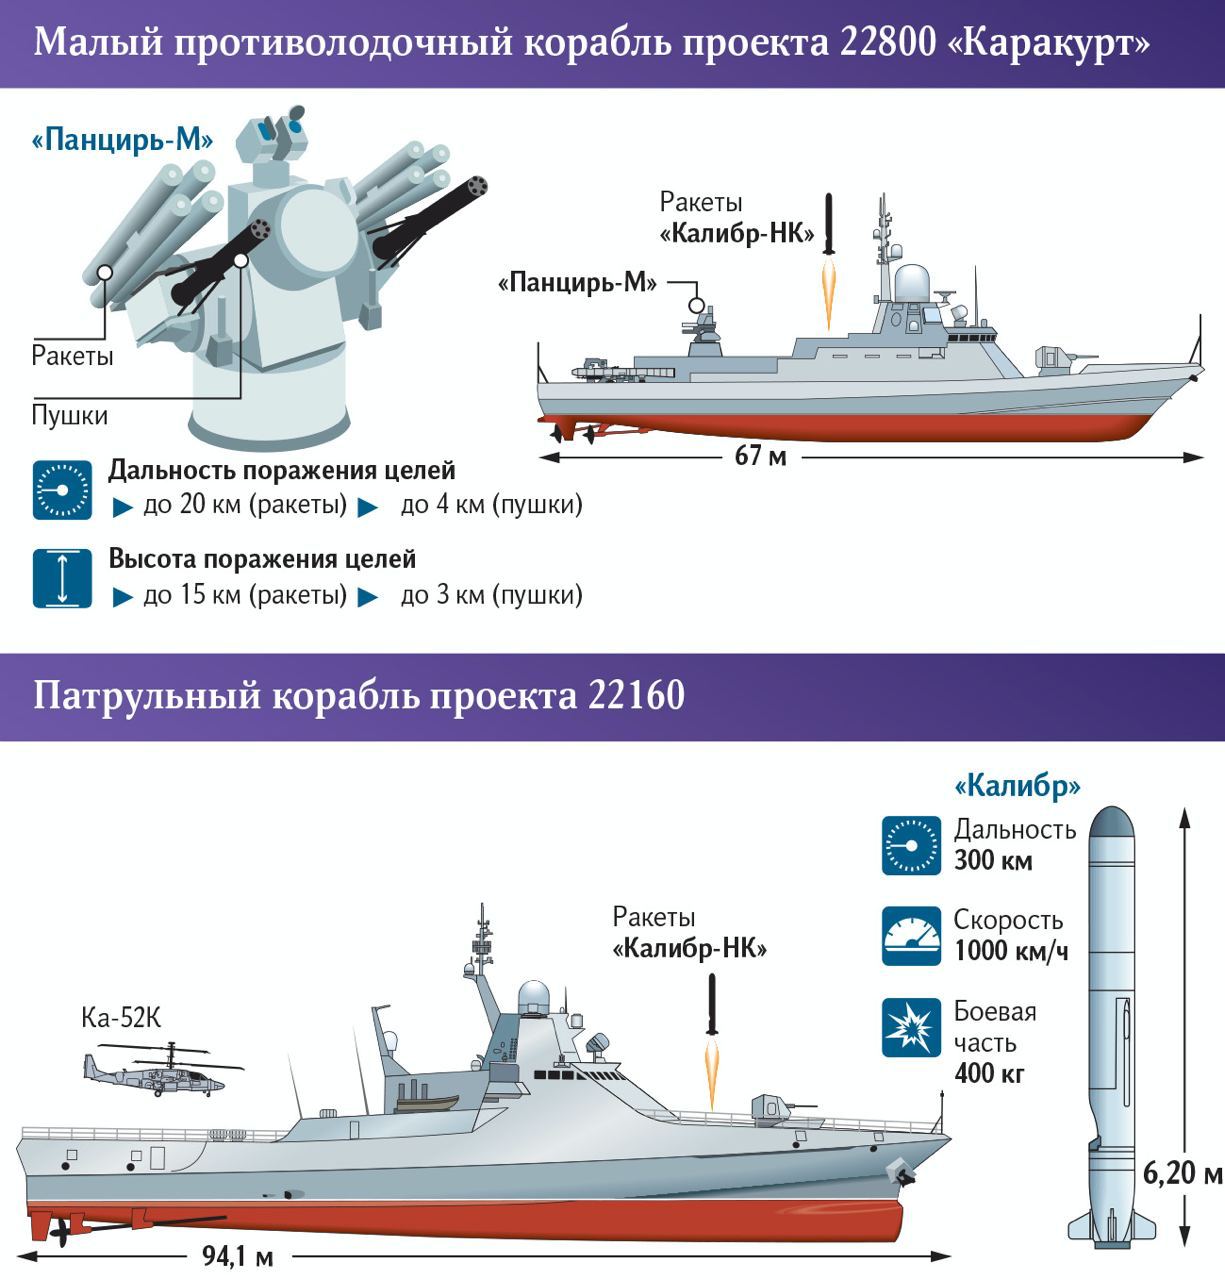 New military ships